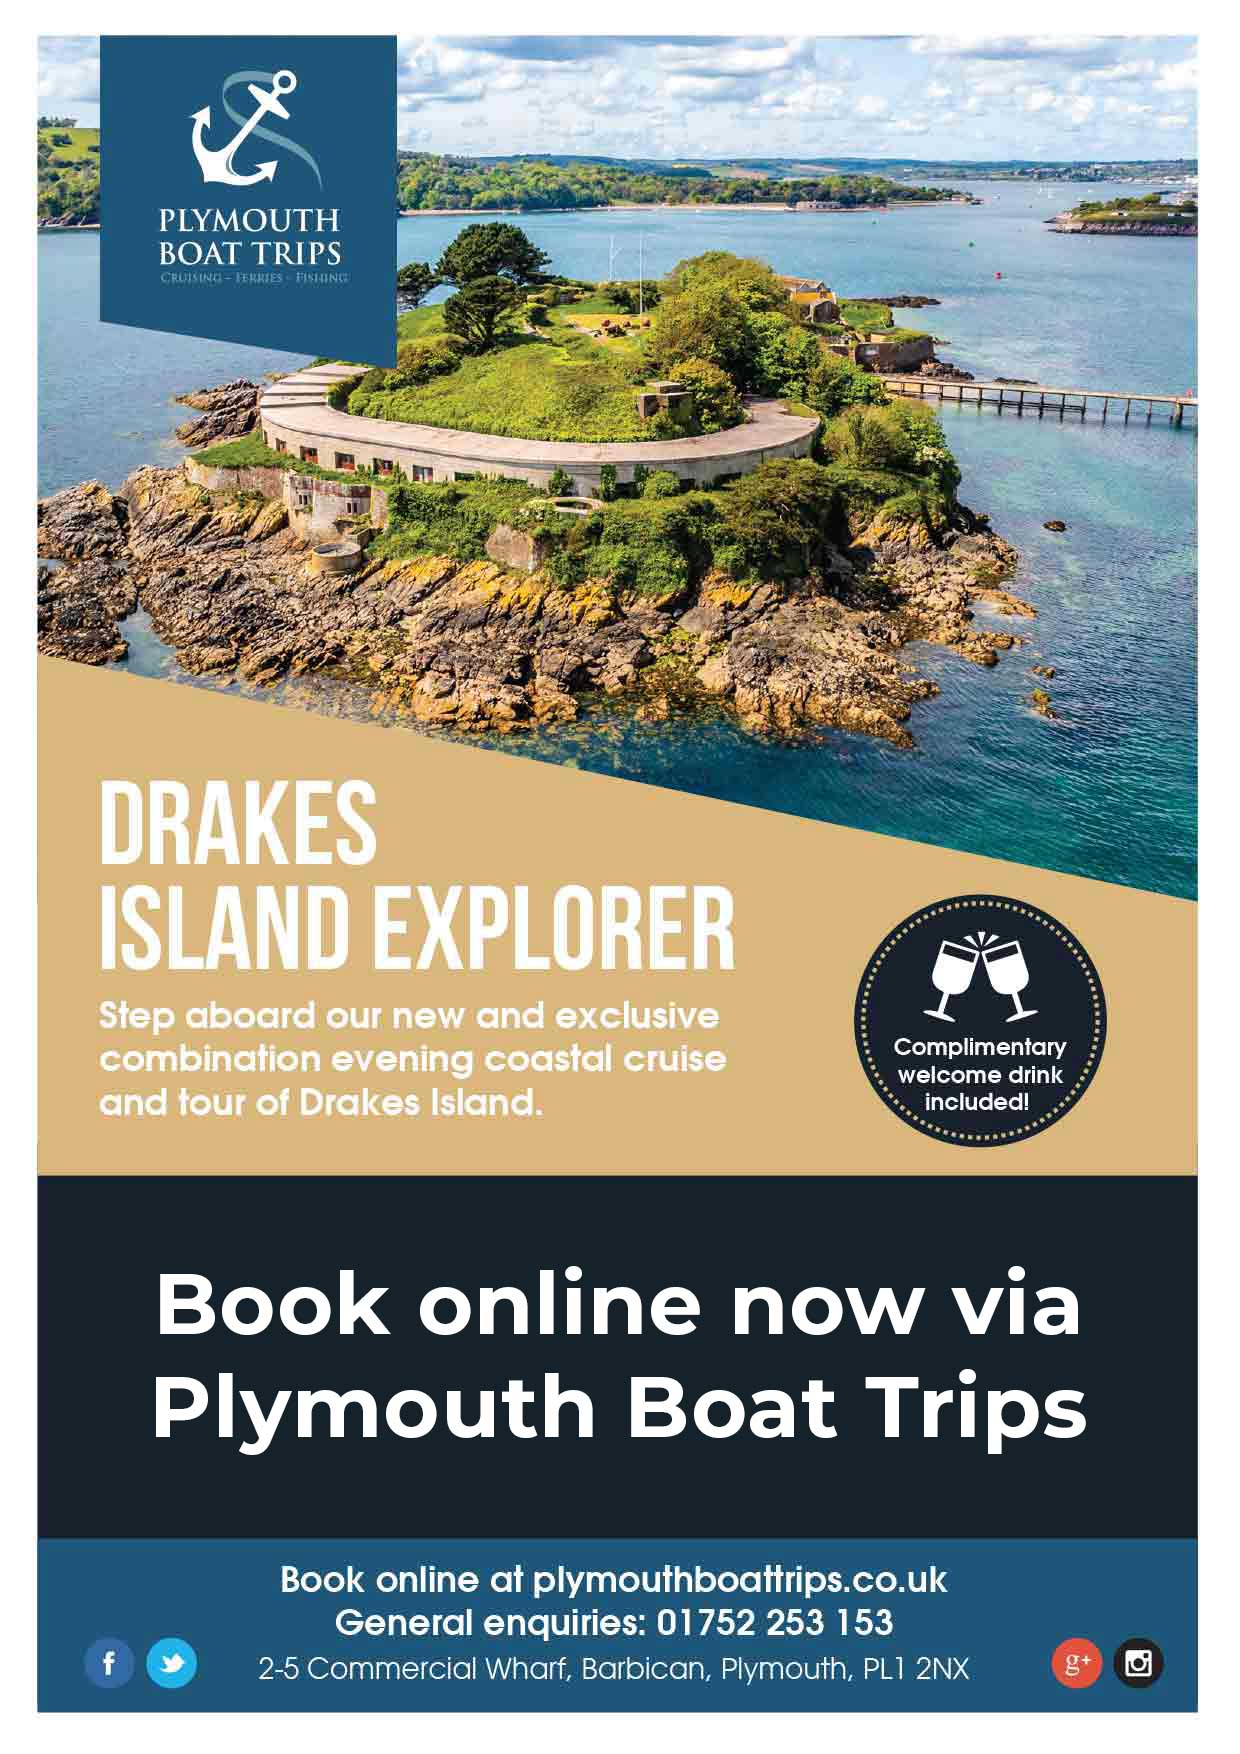 An image of Drake's Island with a call-to-action to book via Plymouth Boat Trips.